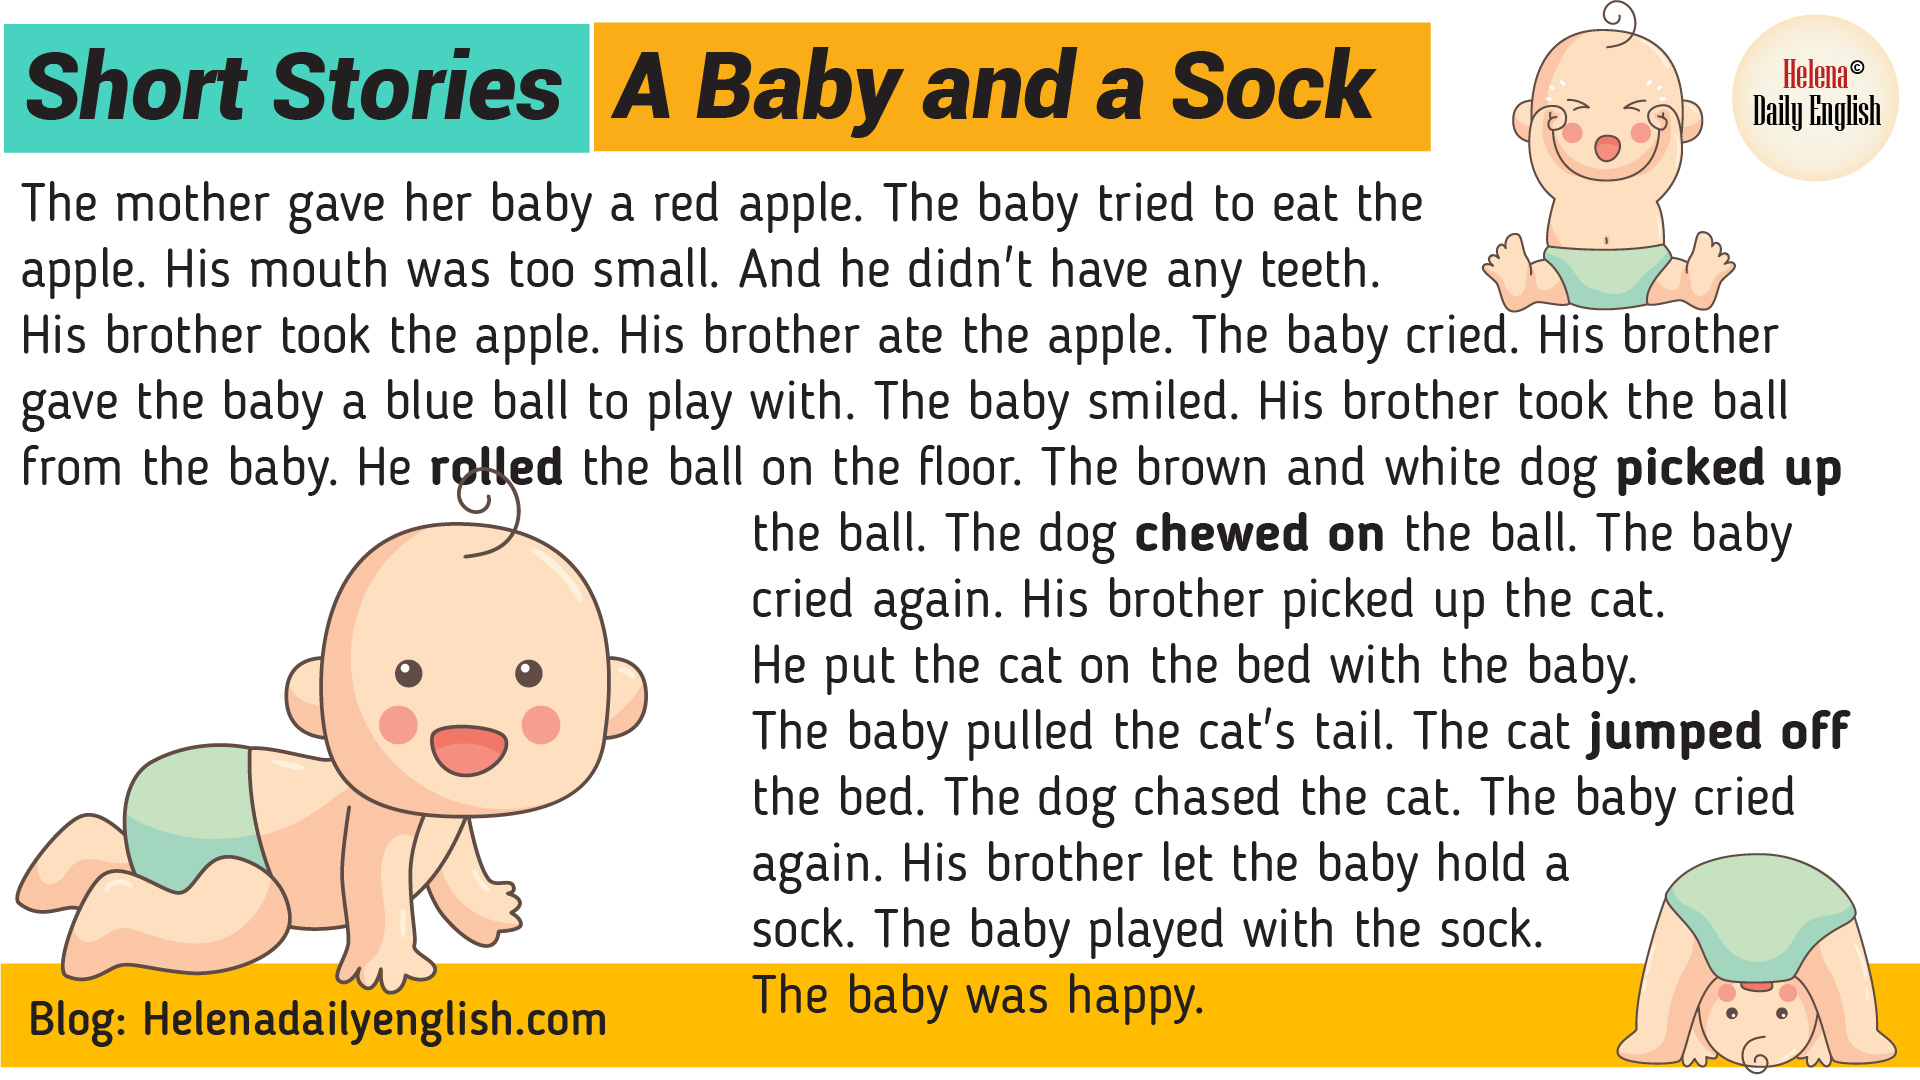 Short Stories in English: A Baby and a Sock